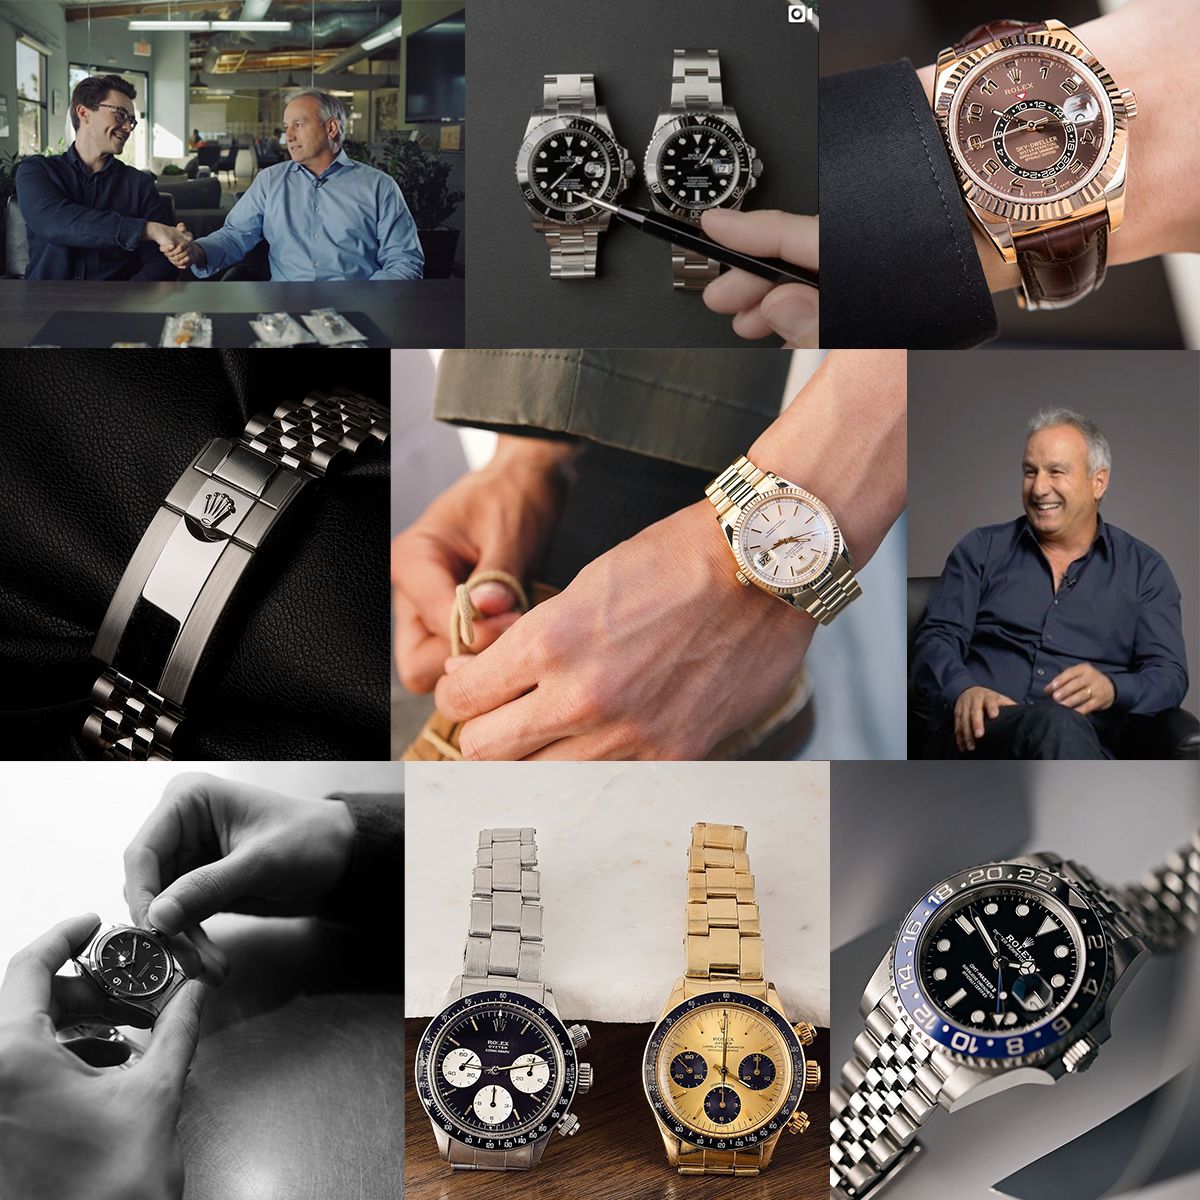 The Top 25 Bob’s Watches Articles of 2019